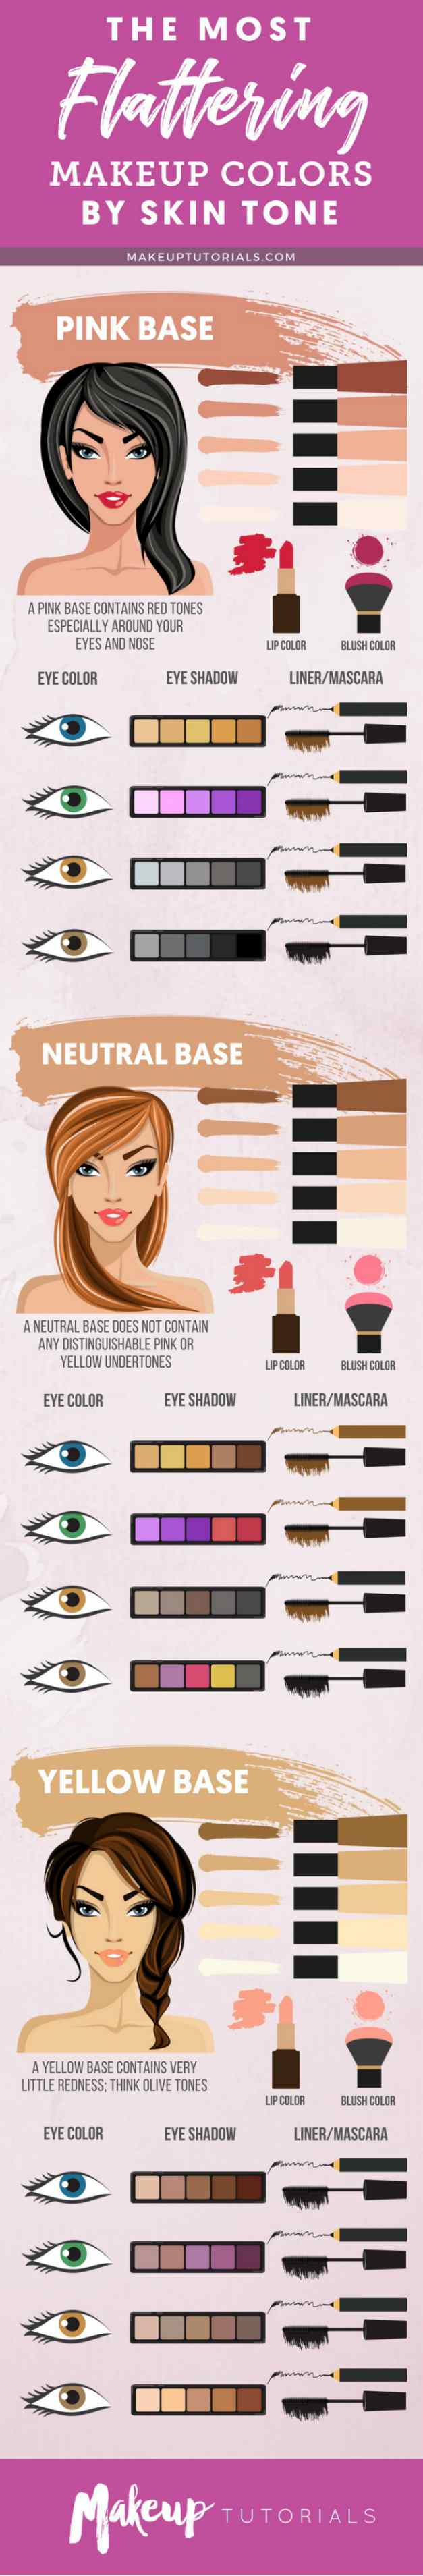 The Most Flattering Makeup Colors by Skin Tone | Makeup Guide | Makeup Colors By Skin Tone